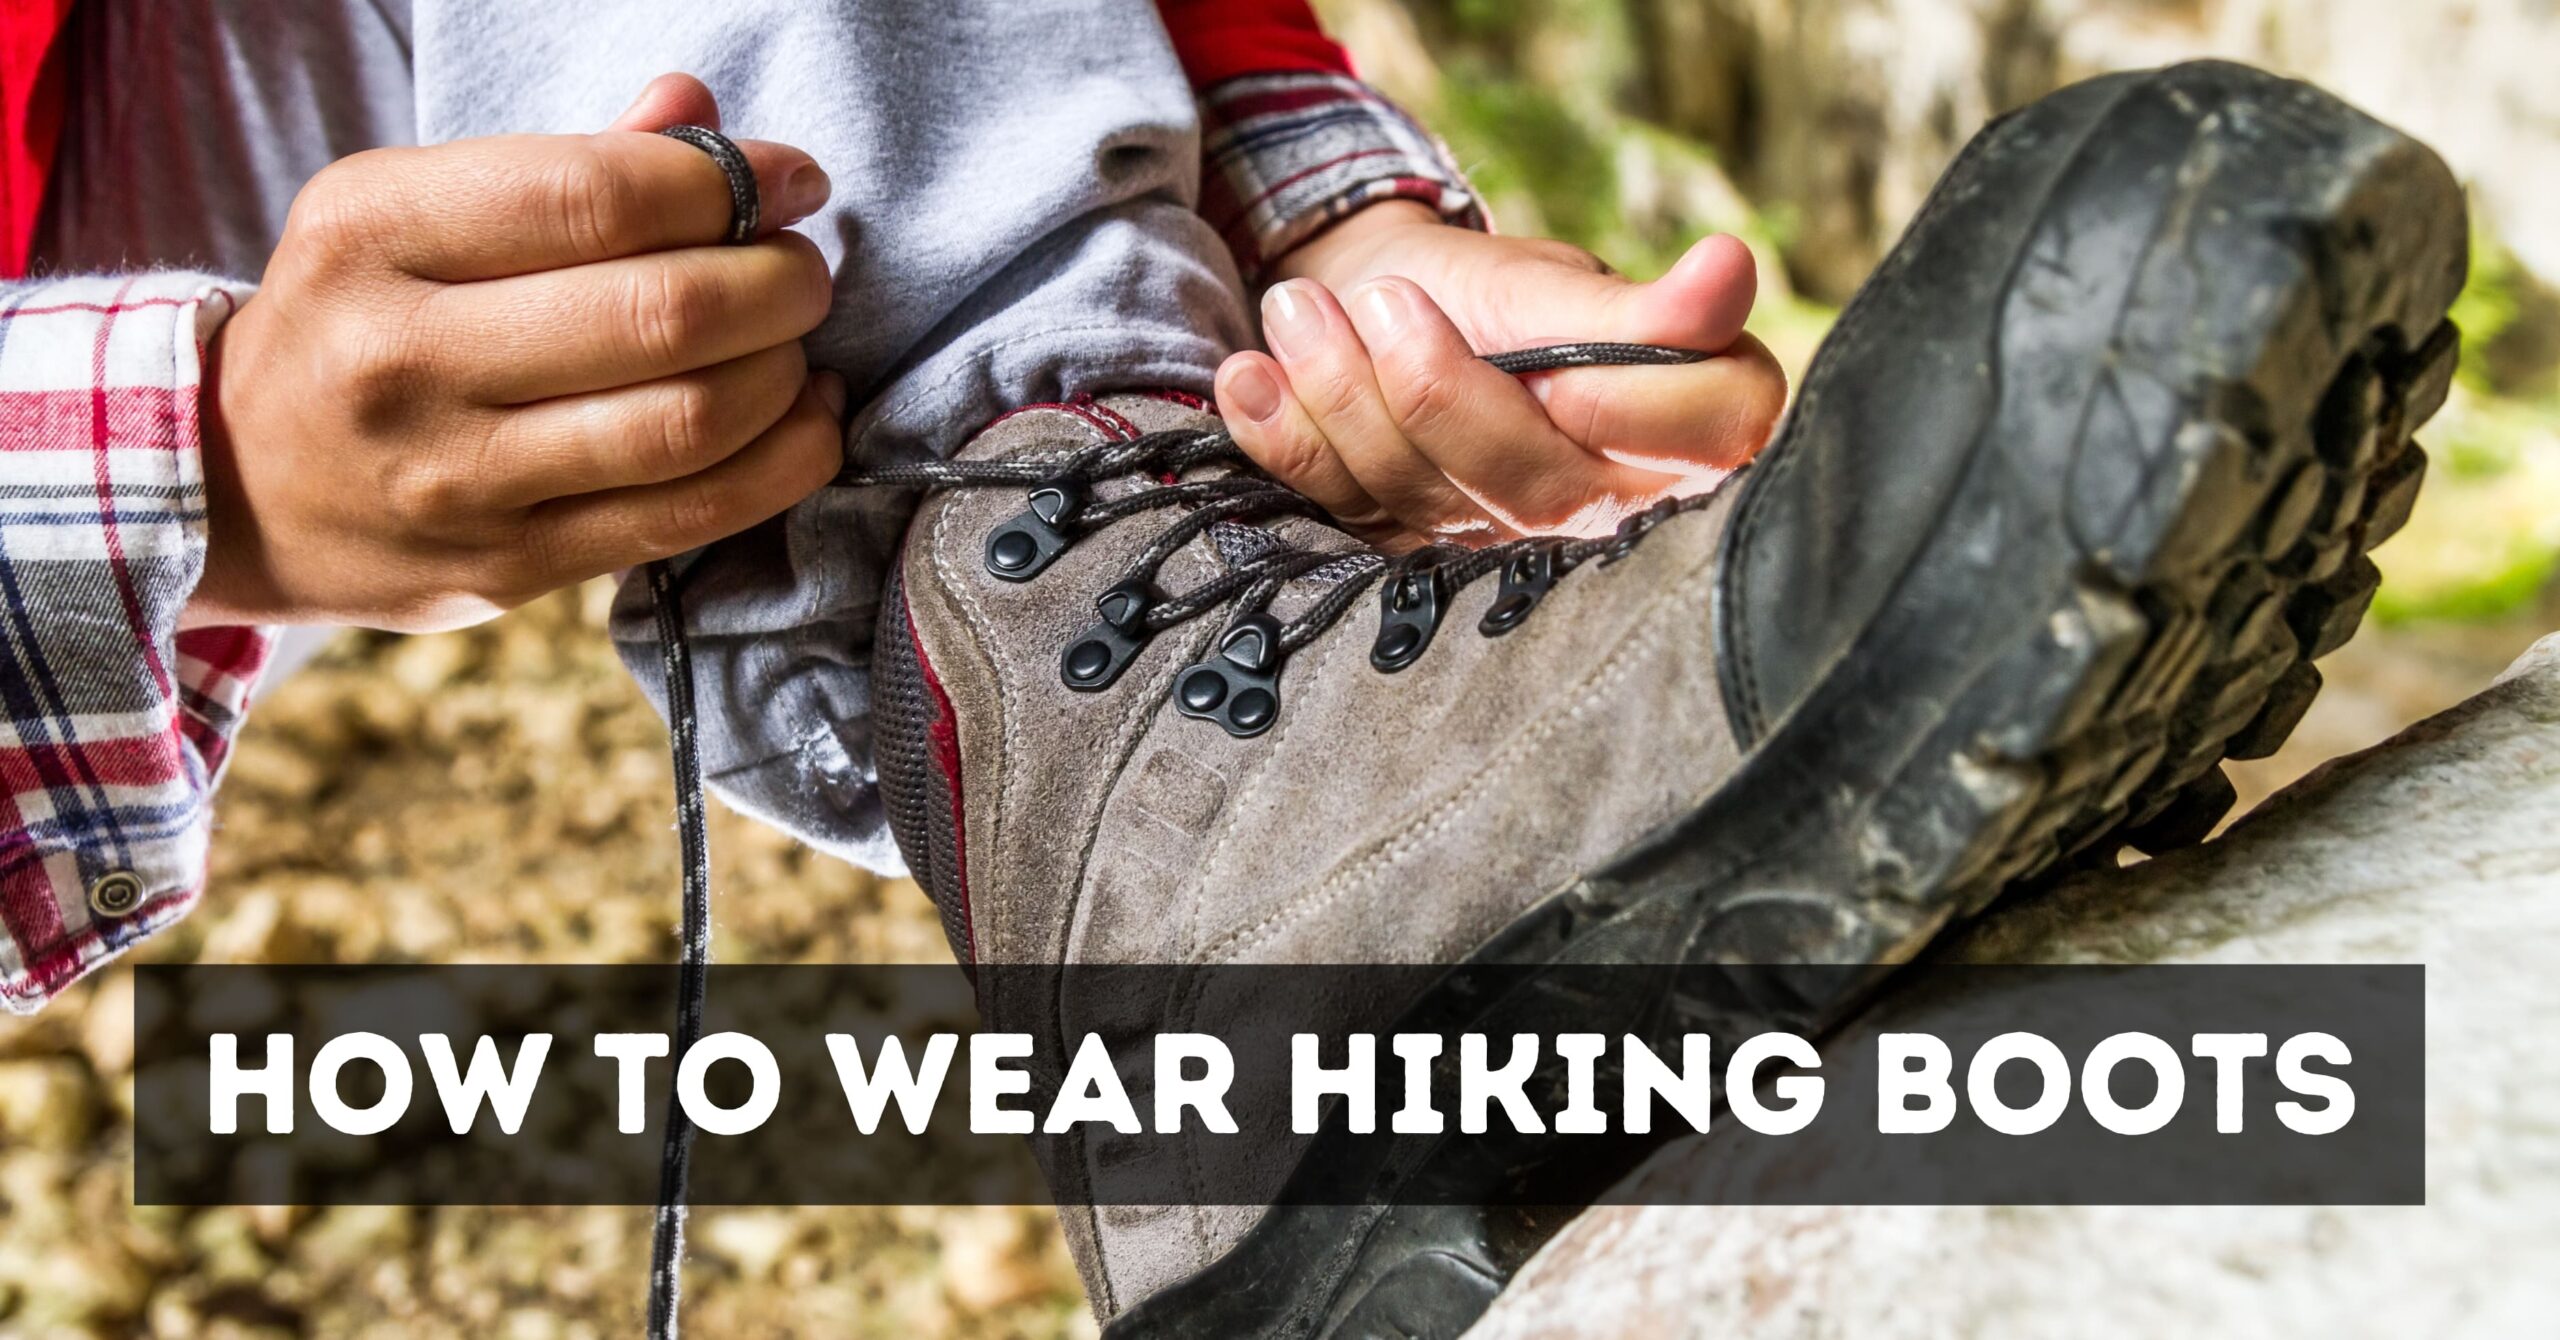 How To Wear Hiking Boots